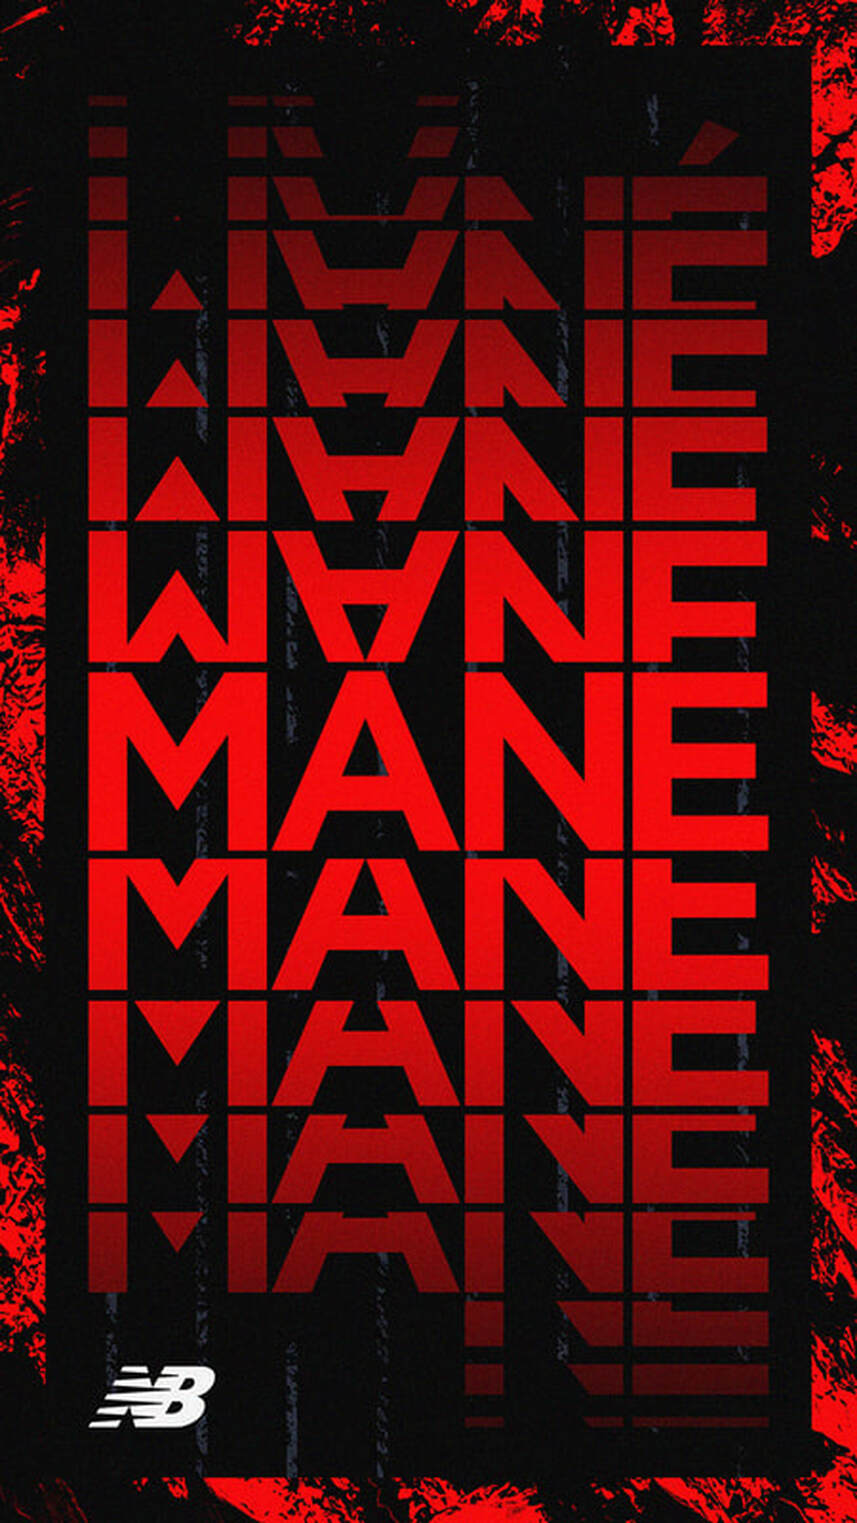 typographic artwork made from the word mane 